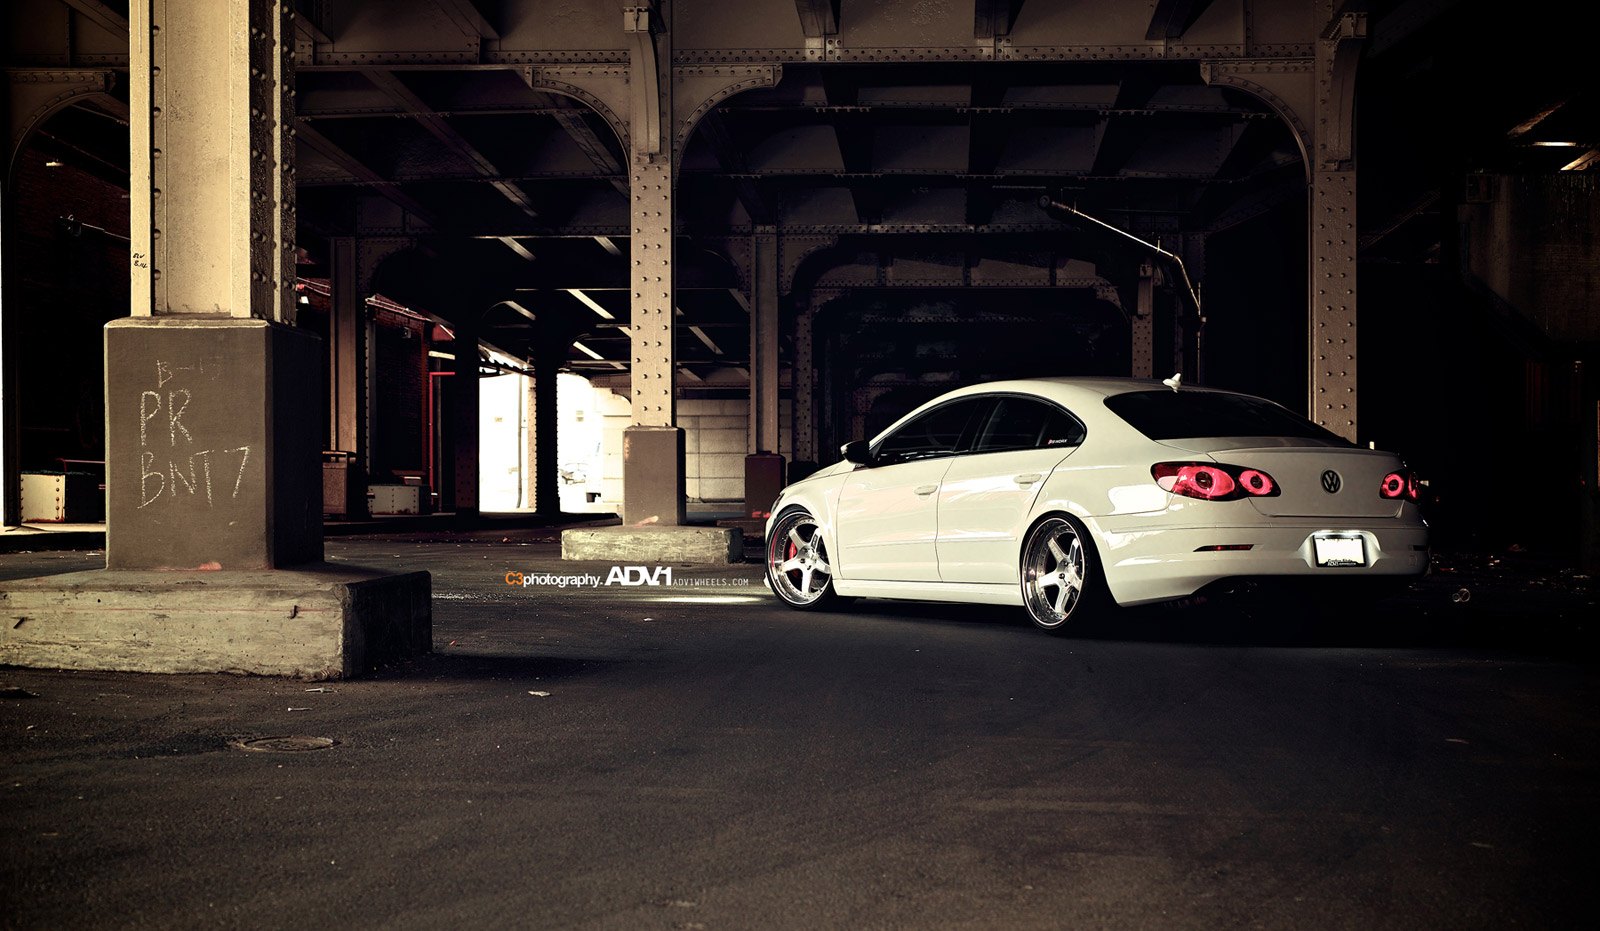 White VW CC with Custom Rear Diffuser - Photo by ADV.1